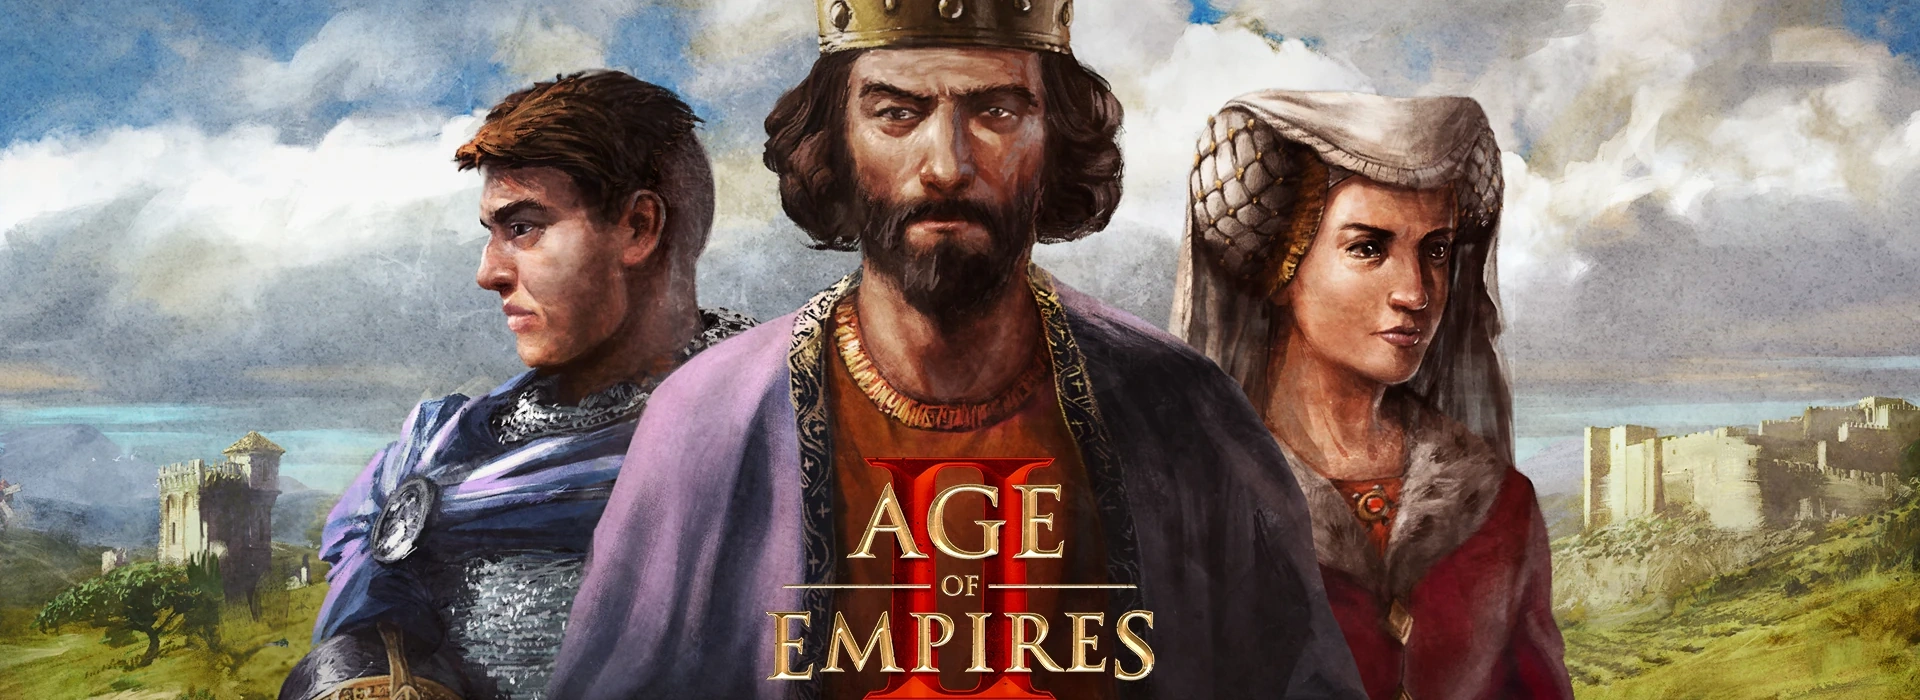 Age.of .Empires.2.banner1